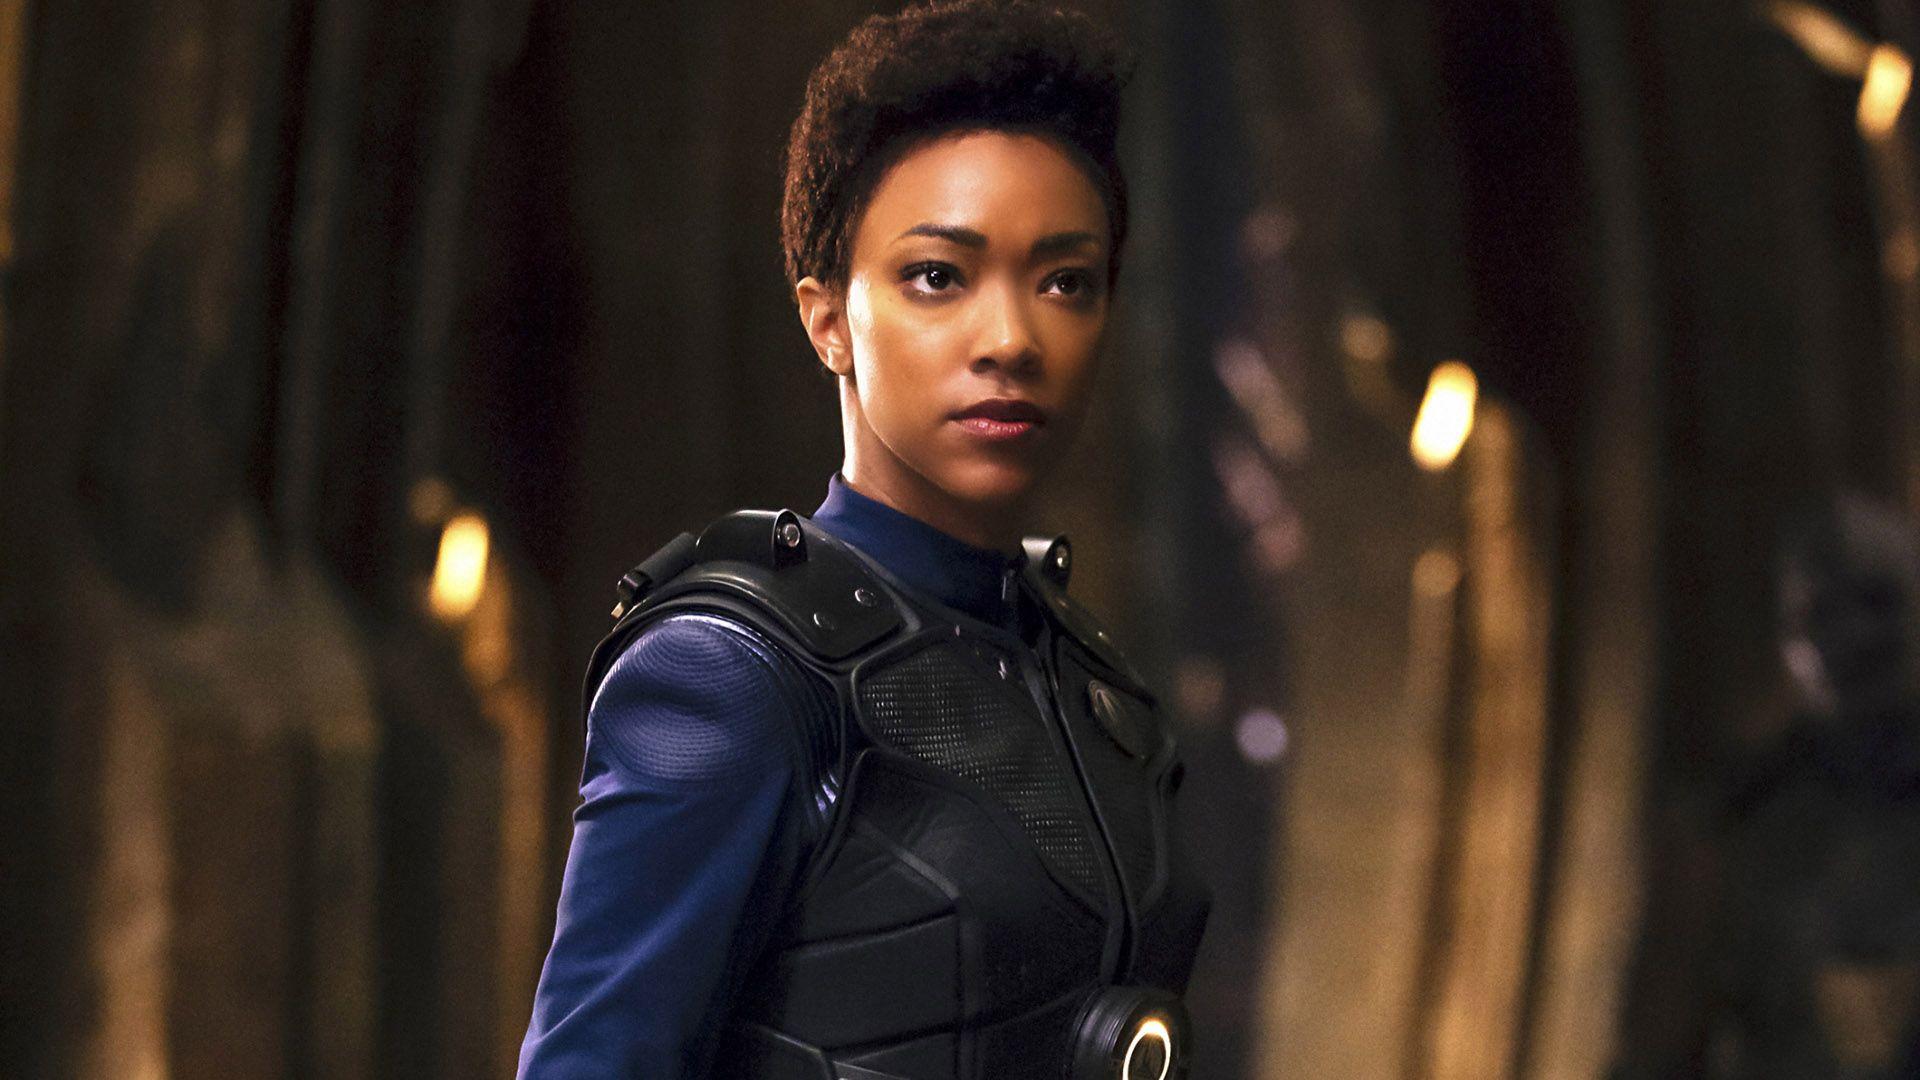 Check Out New Photo From The Fall Finale Of Star Trek: Discovery